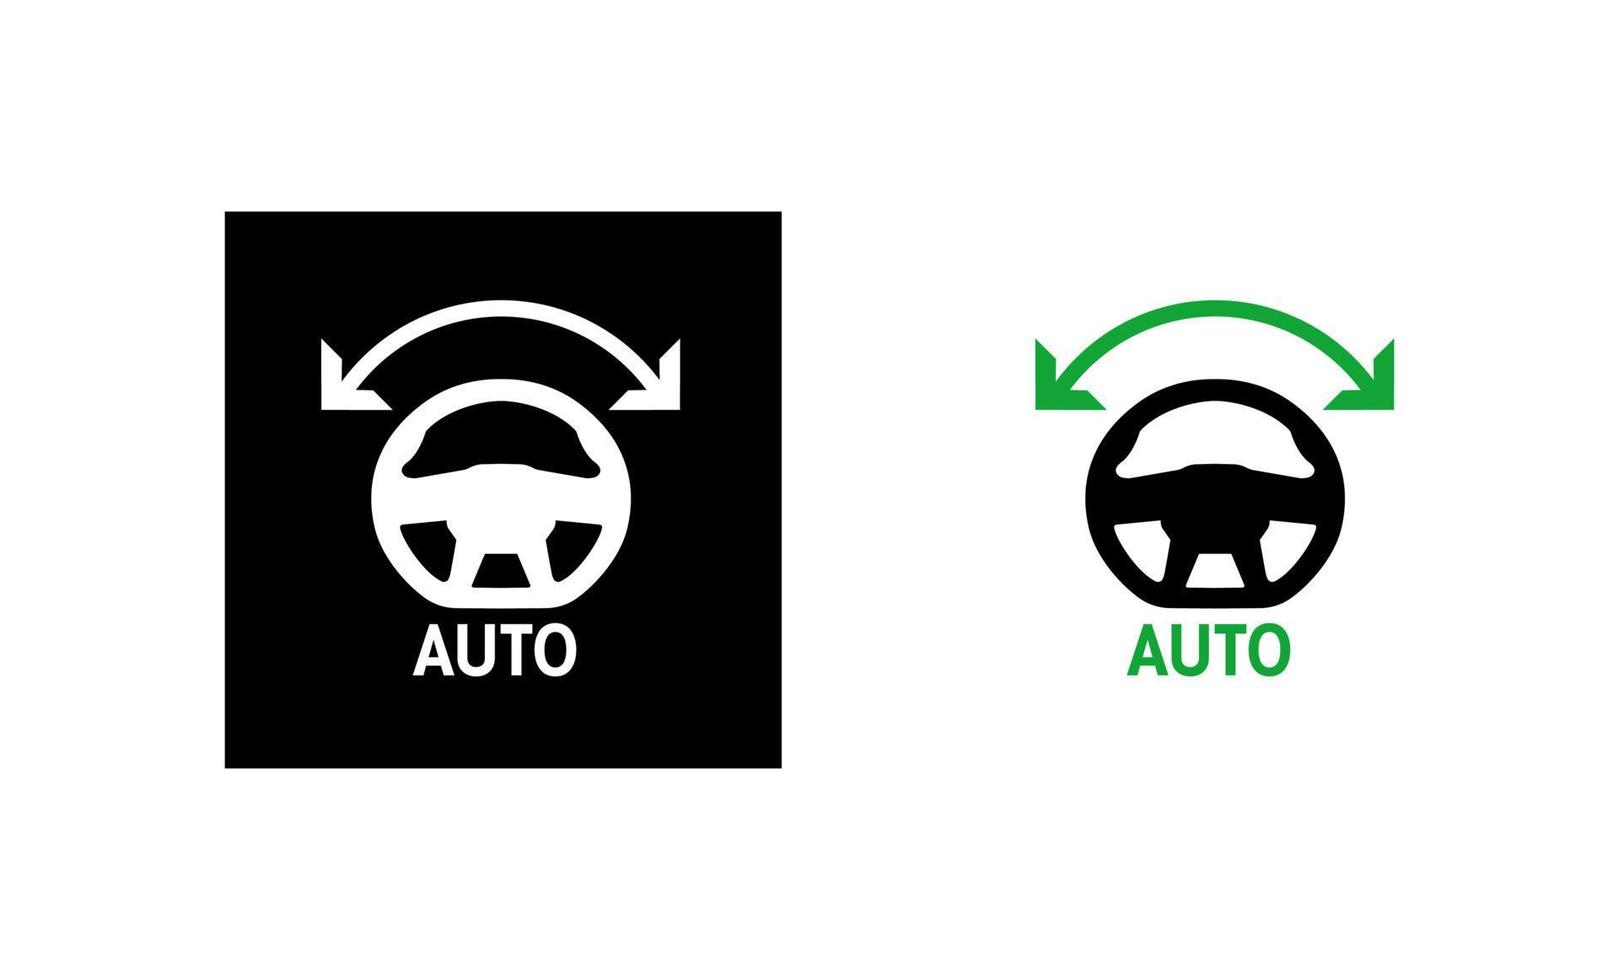 Car auto steering wheel icon. Car road tracking system icon. Silhouette and linear original logo. Simple outline style sign icon. Vector illustration isolated on white background. EPS 10